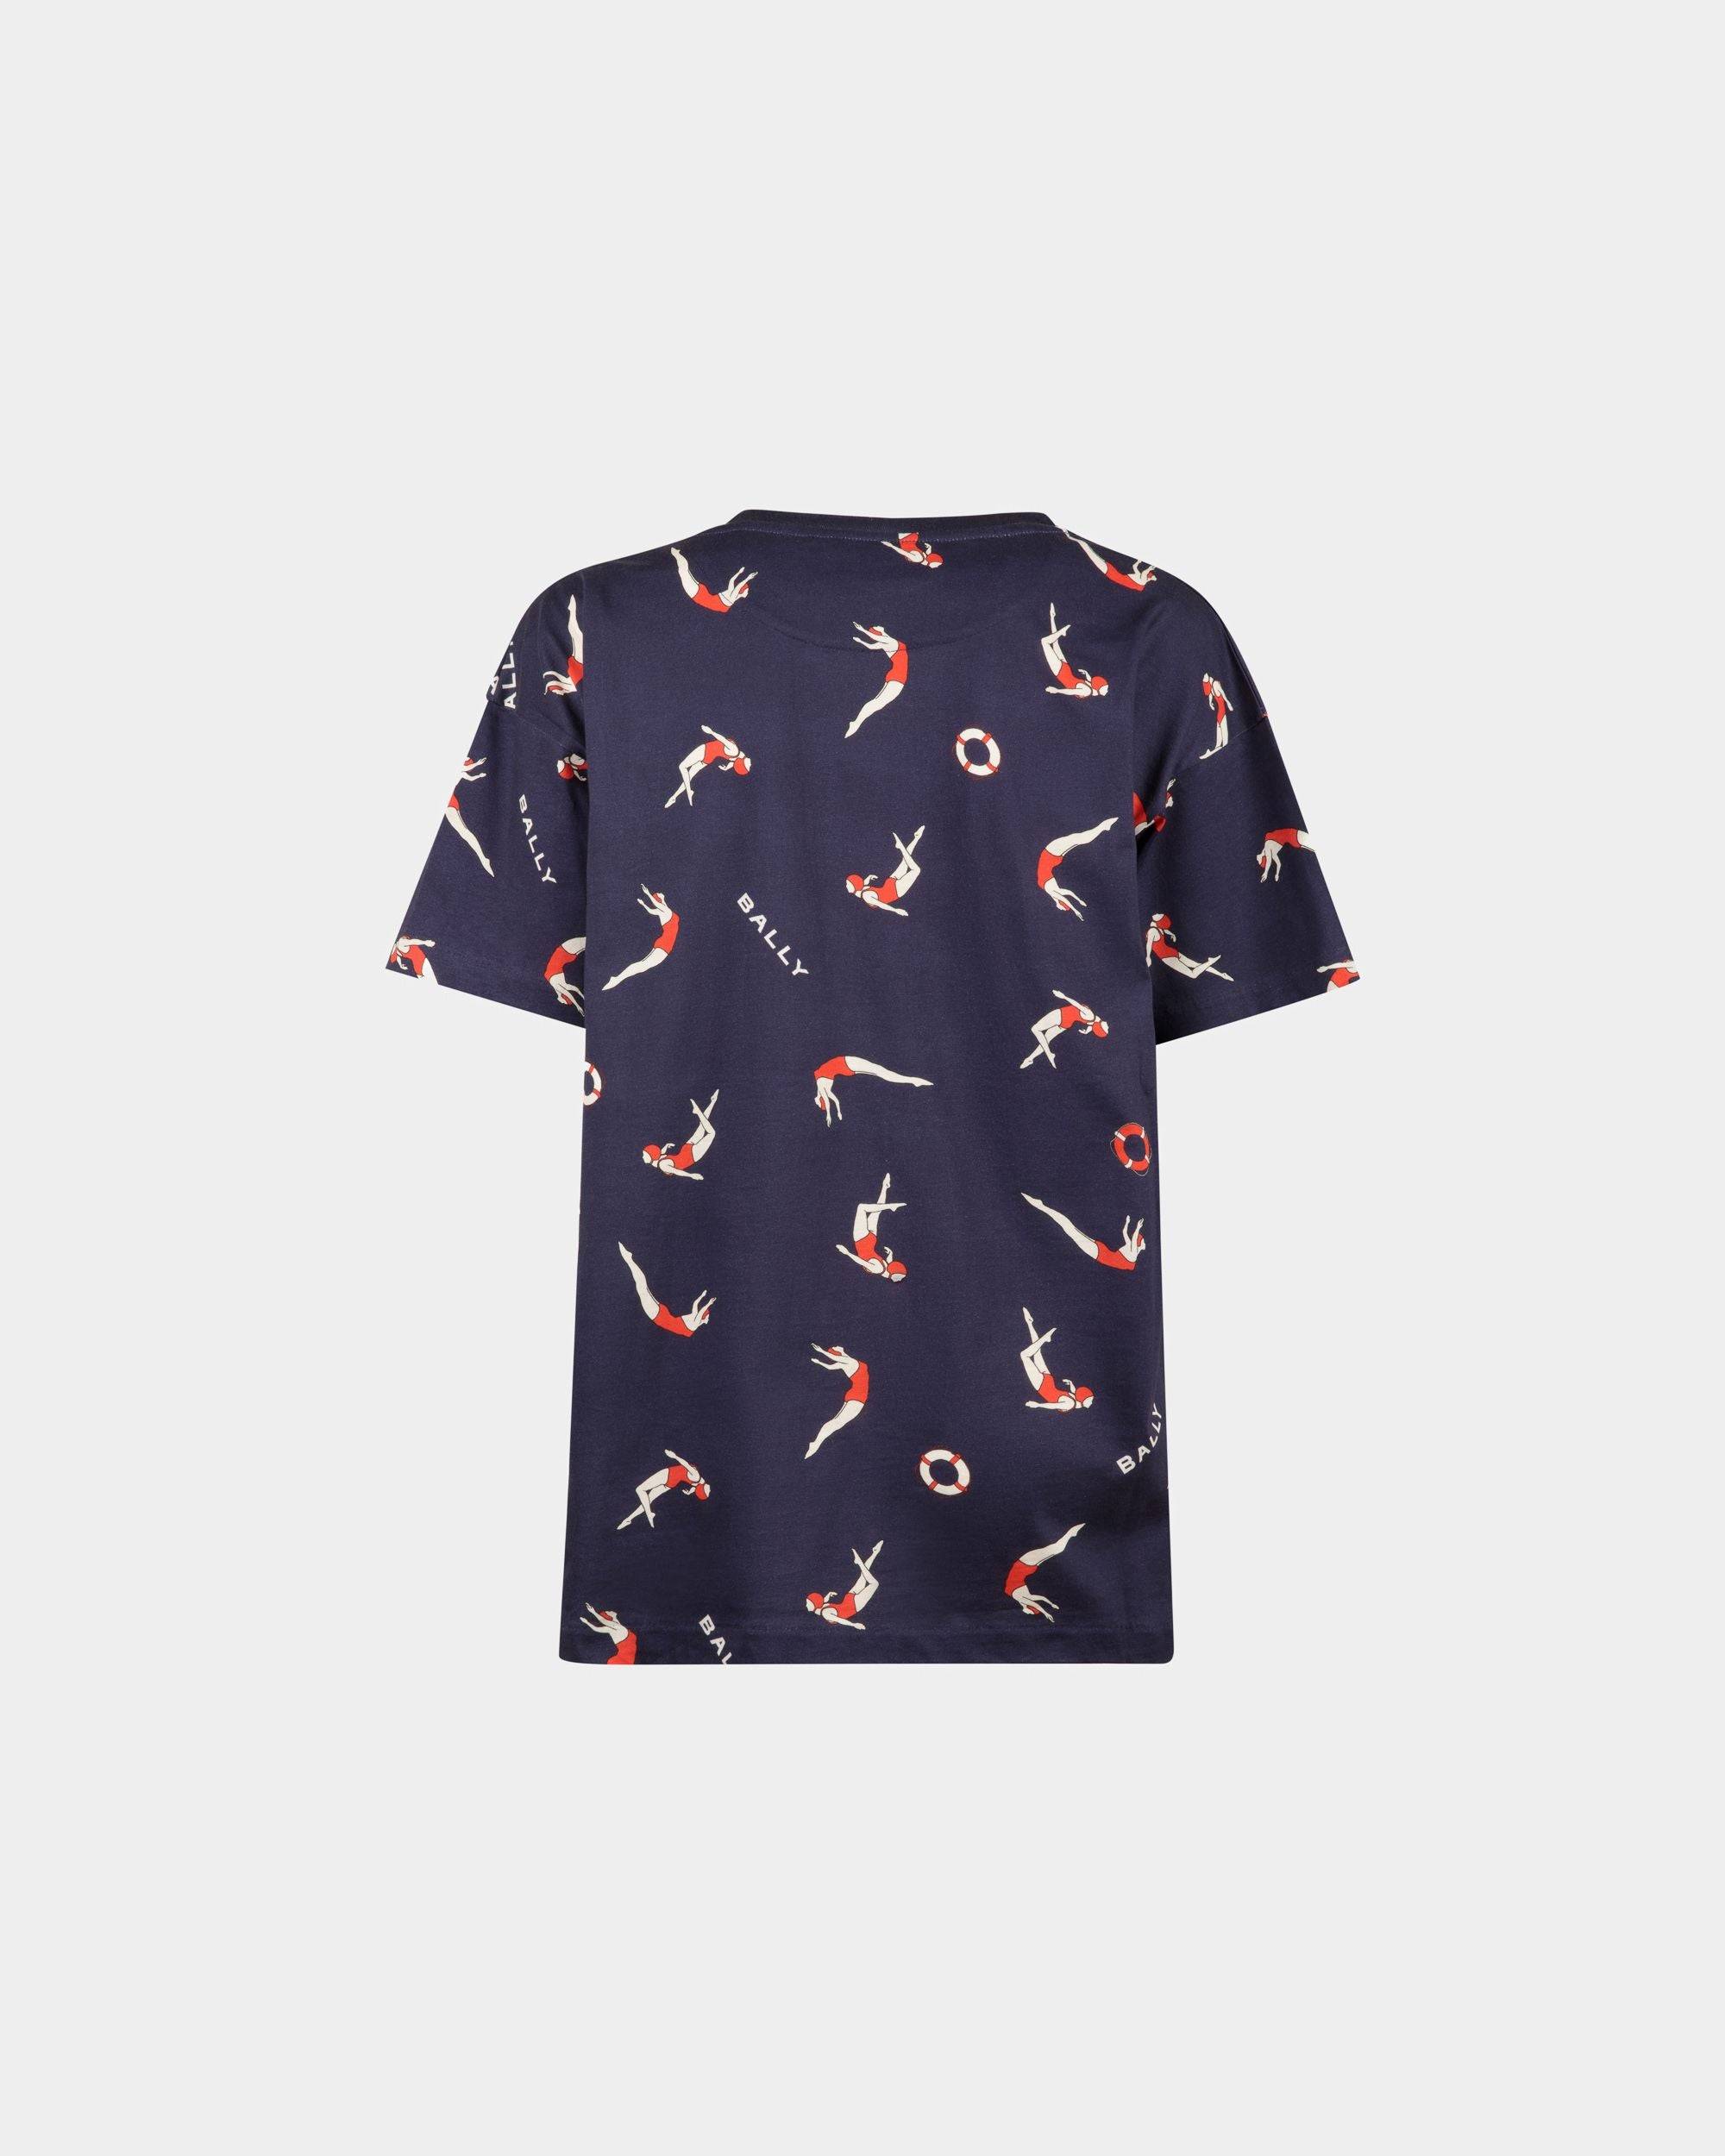 Women's Printed T-shirt in Blue Cotton | Bally | Still Life Back